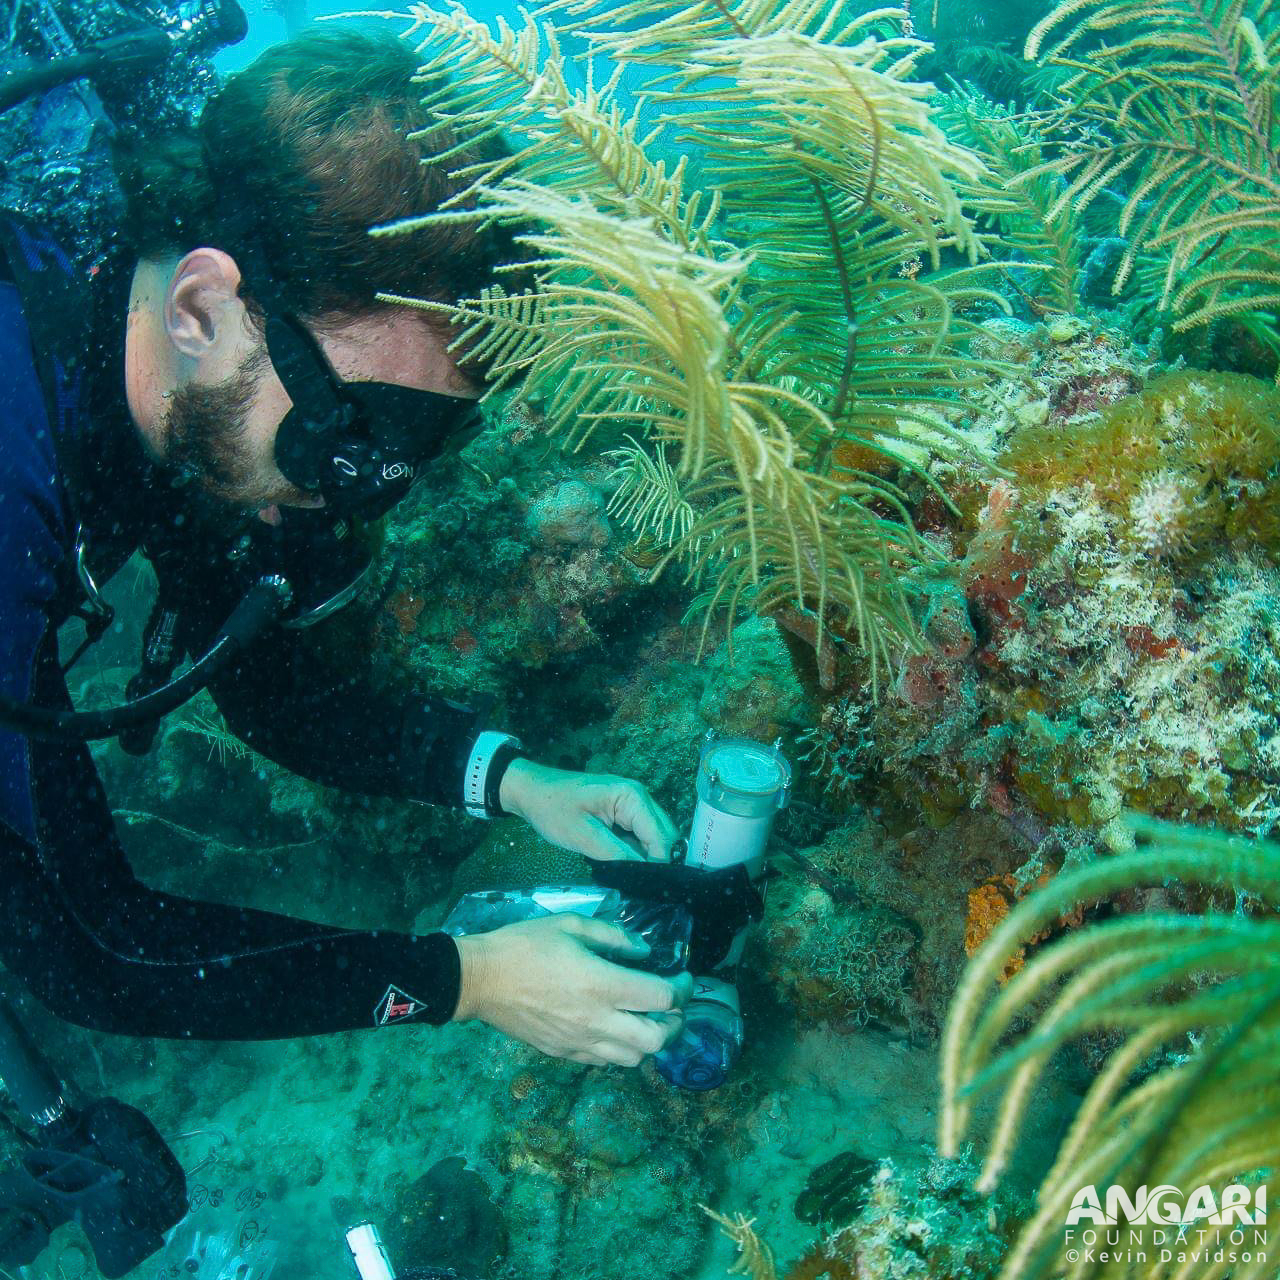 Setting up a SAS on Expedition 16 with R/V ANGARI in Dry Tortugas. PC: Kevin Davidson